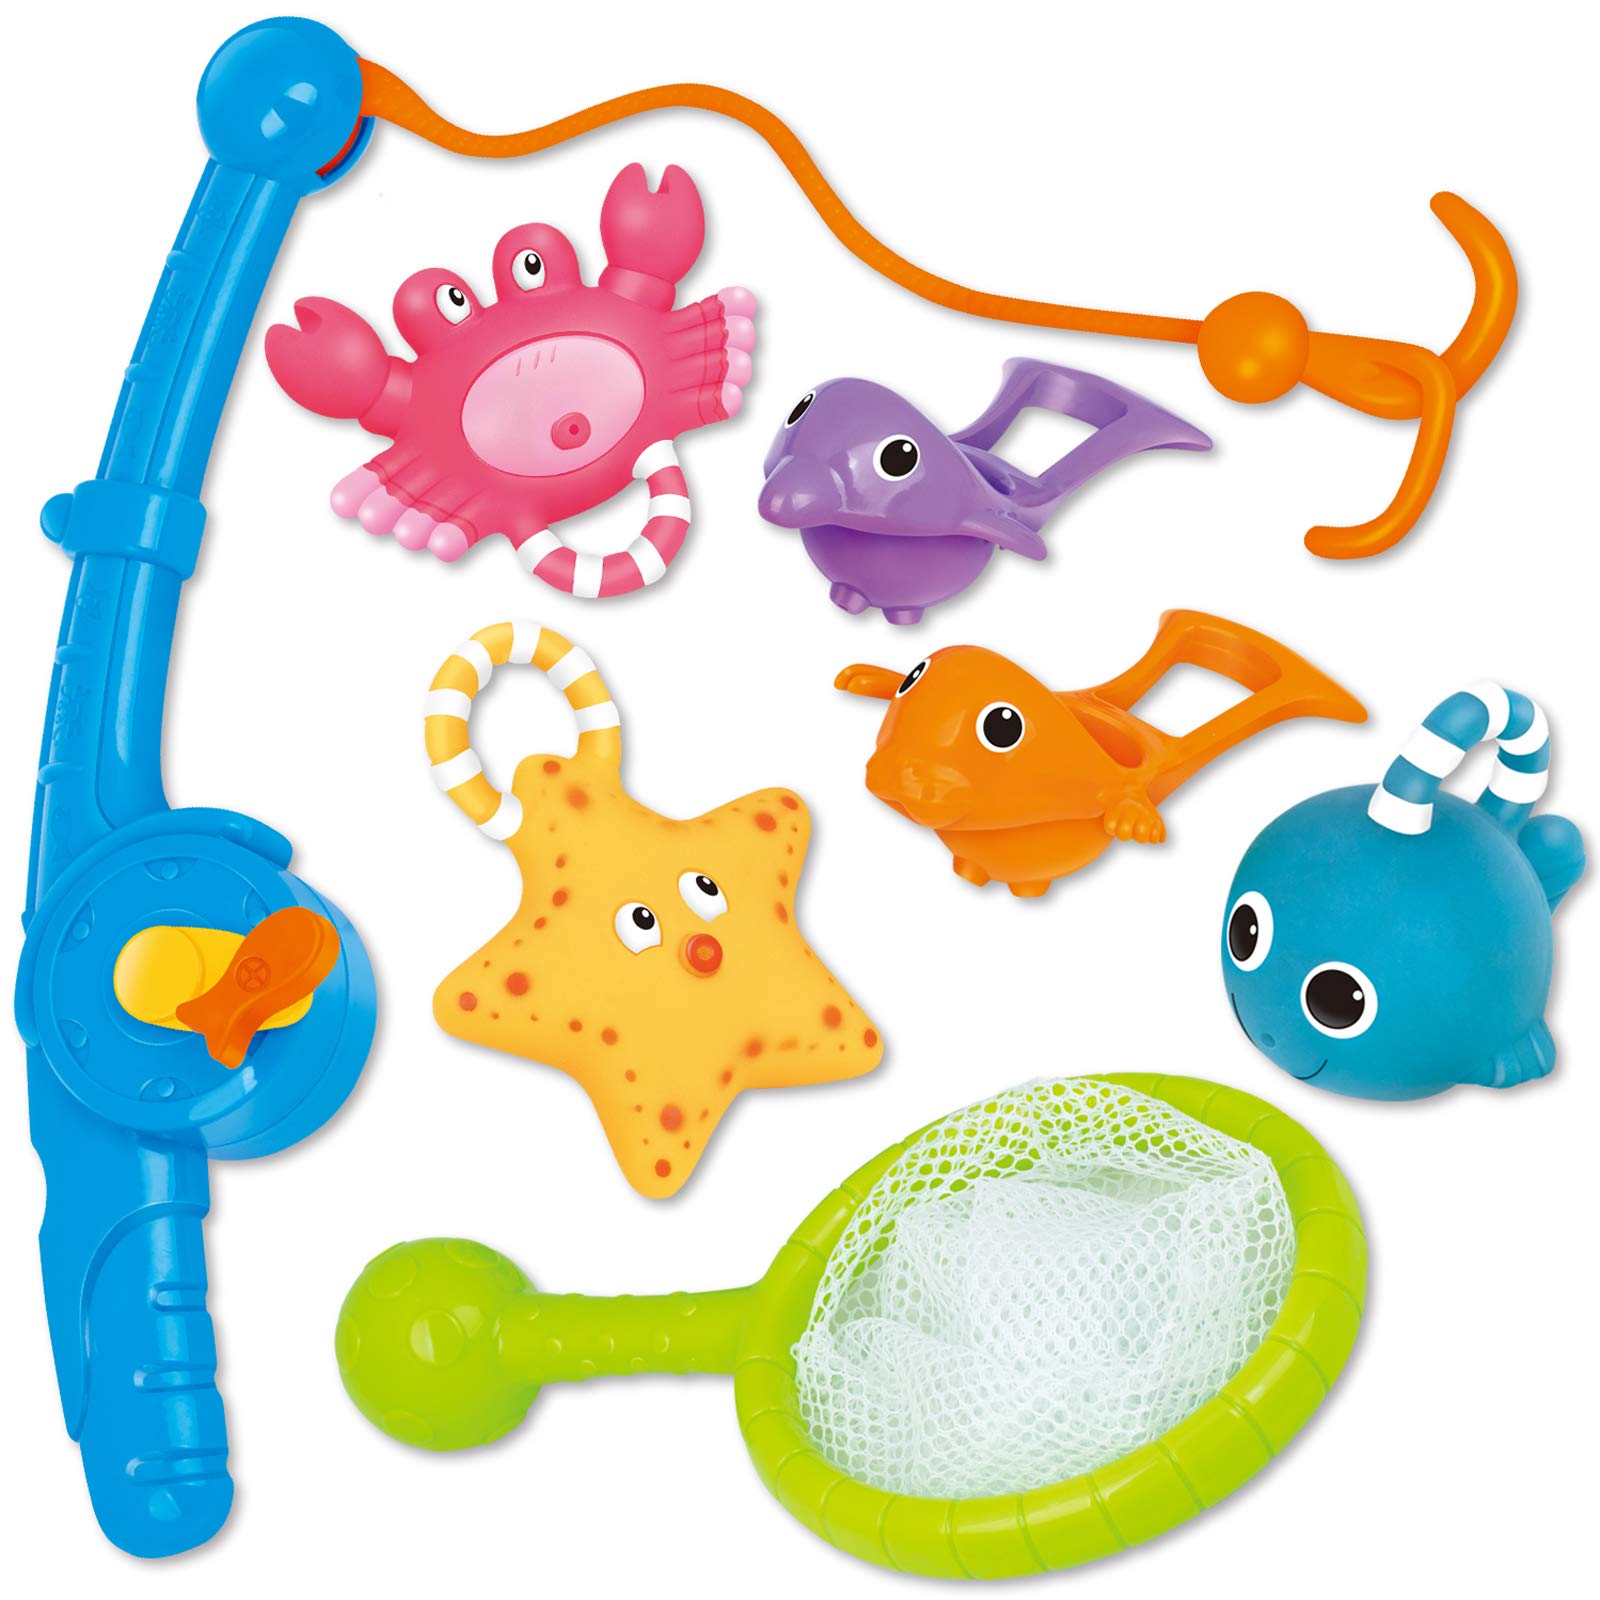 Bath Toy, Fishing Floating Squirts Toy and Water Scoop with Organizer Bag(8 Pack), KarberDark Fish Net Game in Bathtub Bathroom Pool Bath Time for Kids Toddler Baby Boys Girls, Bath Tub Spoon